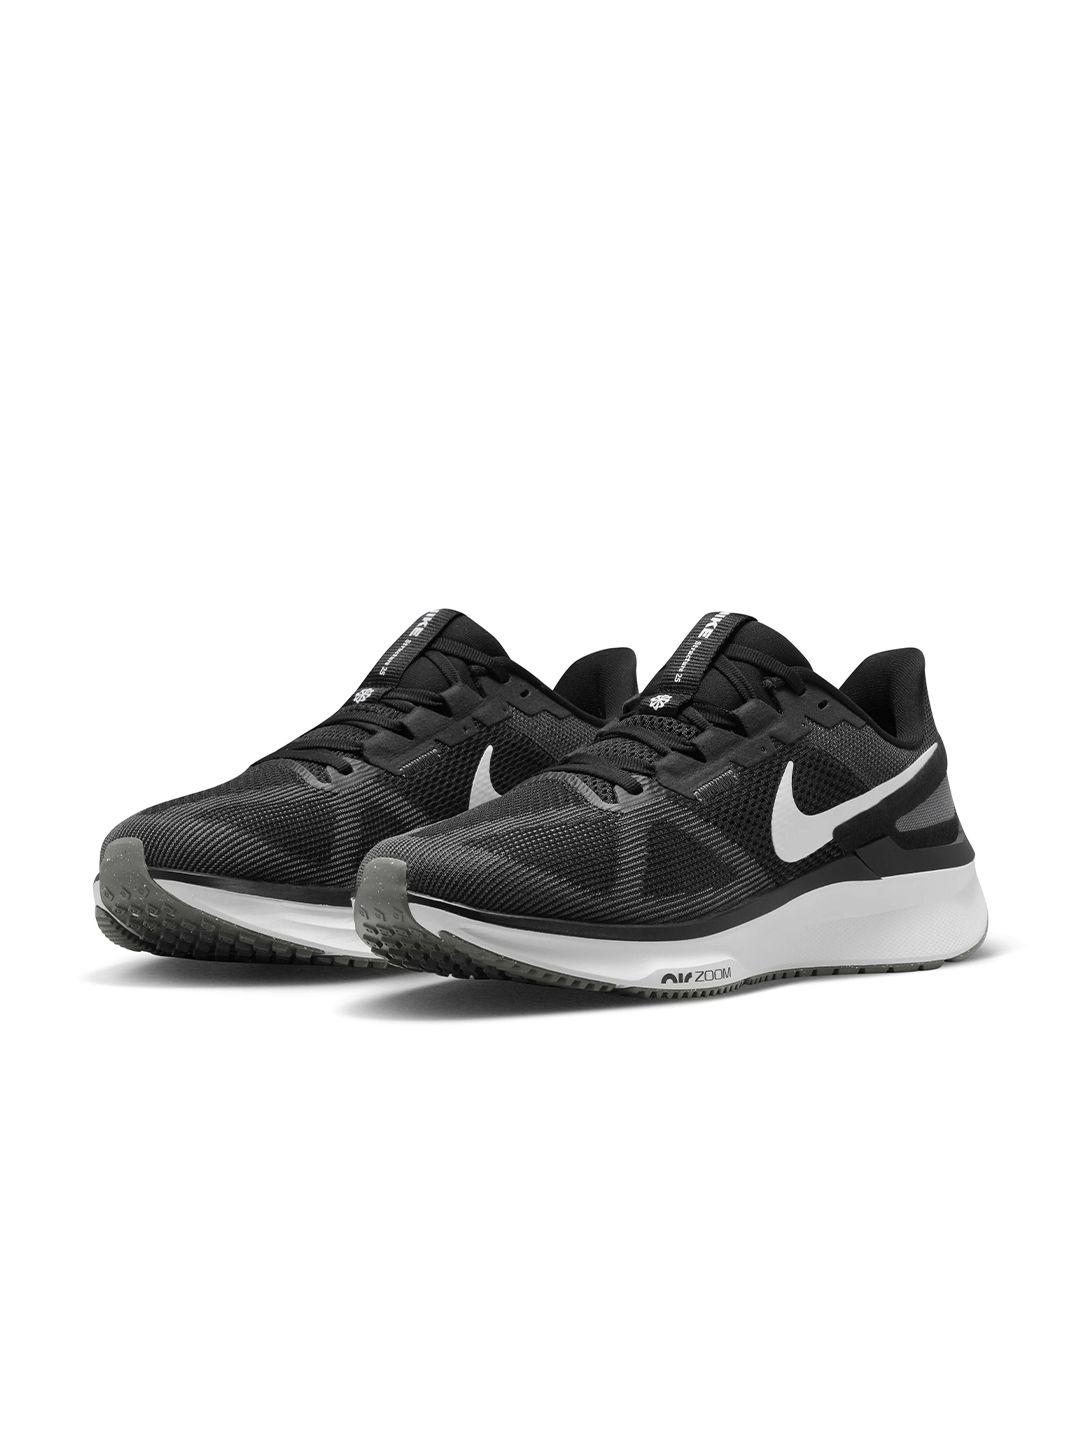 nike-men-structure-25-textured-running-shoes